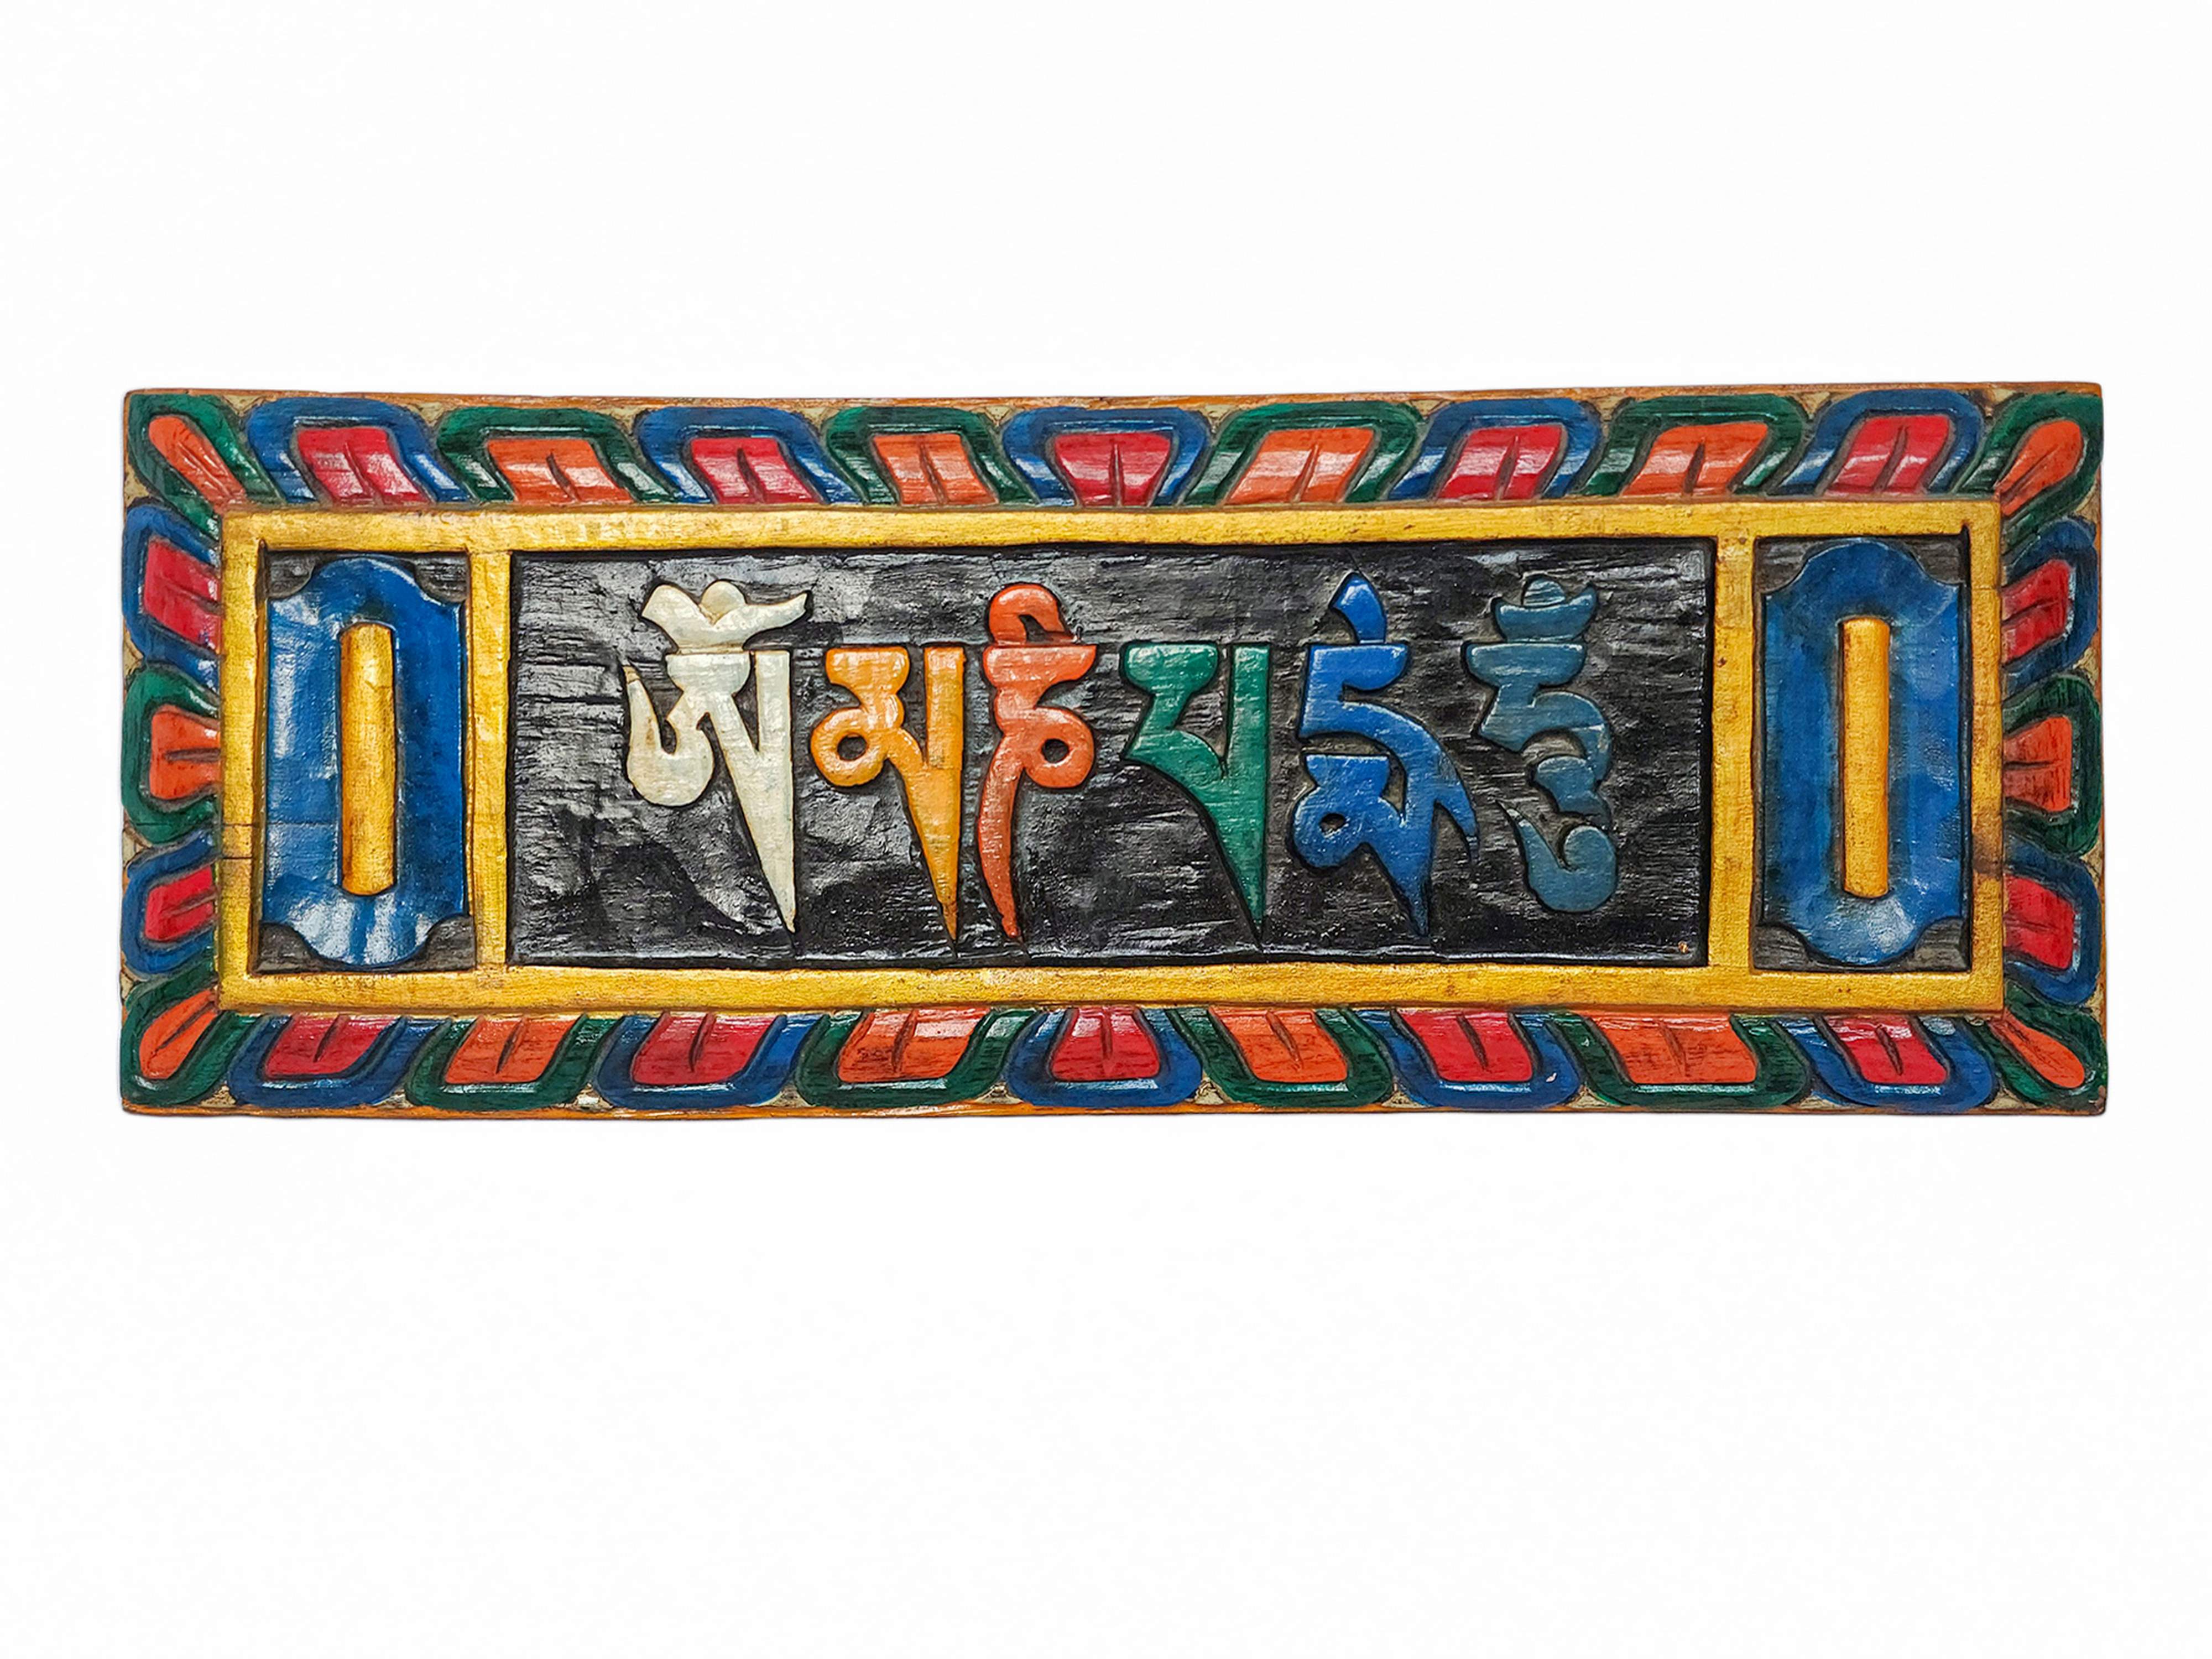 Tibetan Ritual Omph Wall Hangimg, carved And Painted